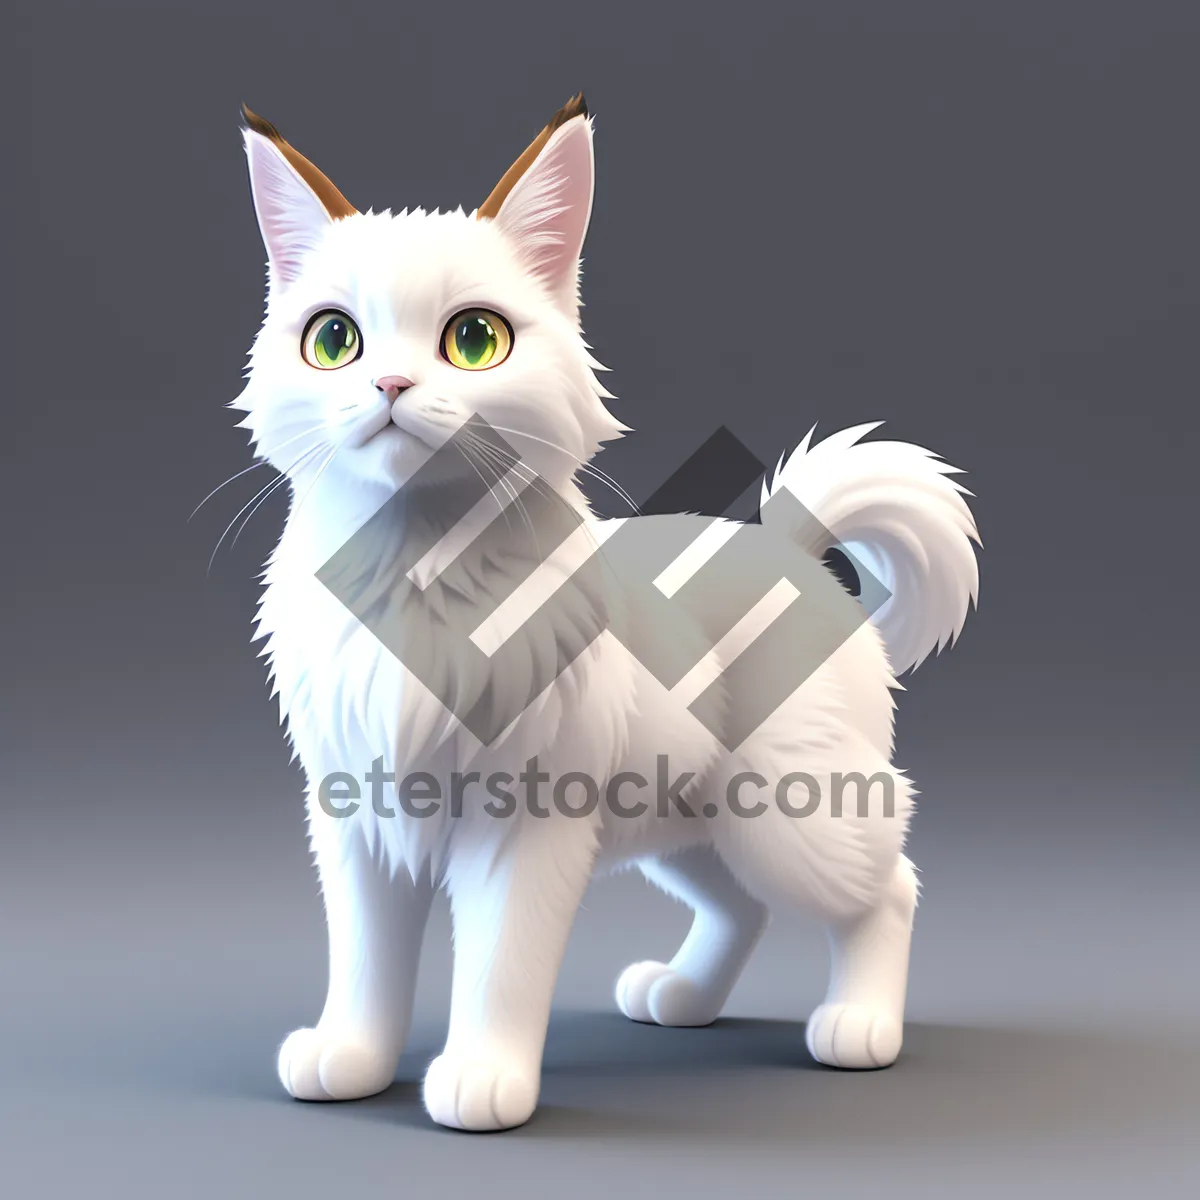 Picture of Curious Kitty: Adorable White Fluffy Cat with Striped Fur